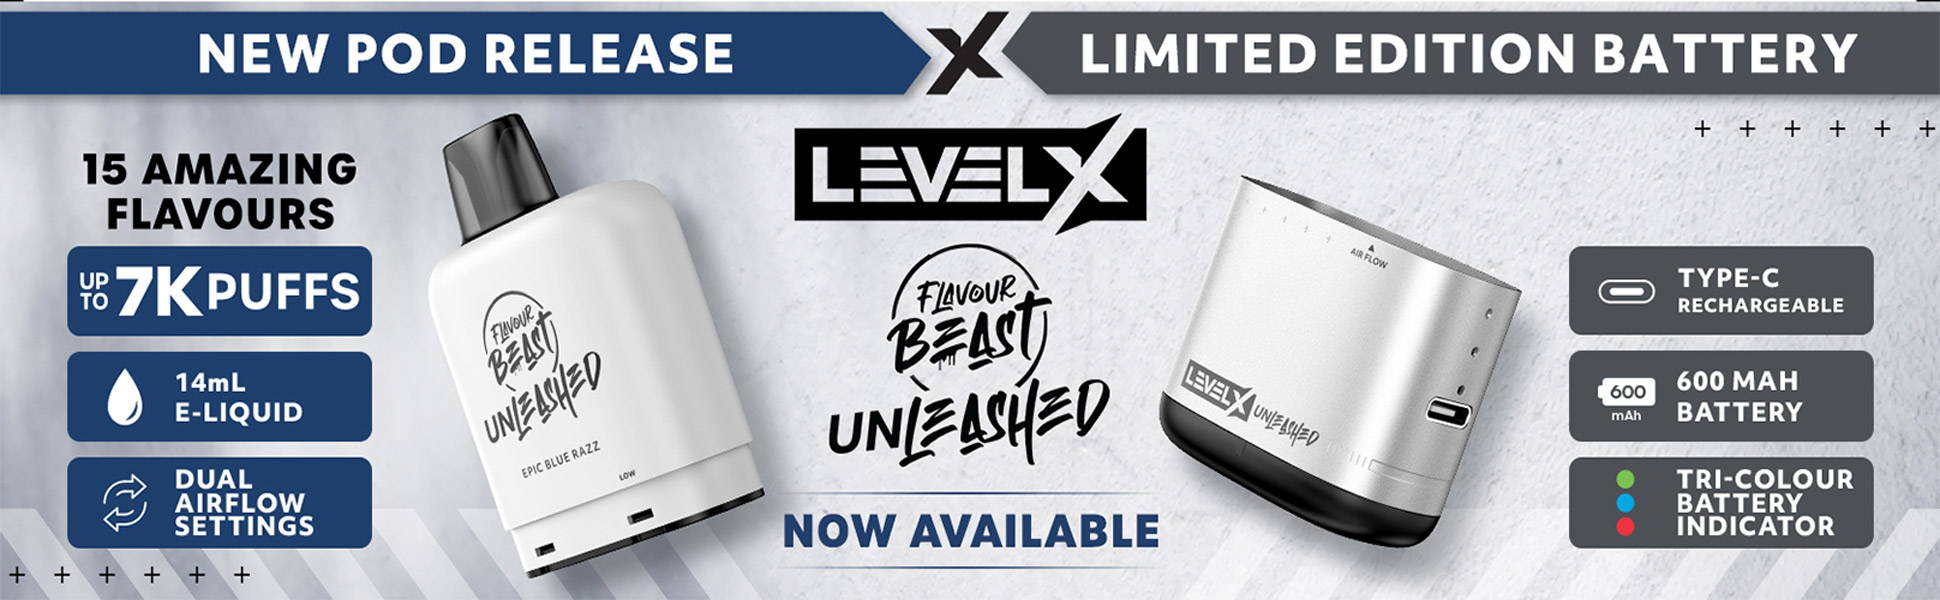 FLAVOUR BEAST UNLEASHED LEVEL X PODS